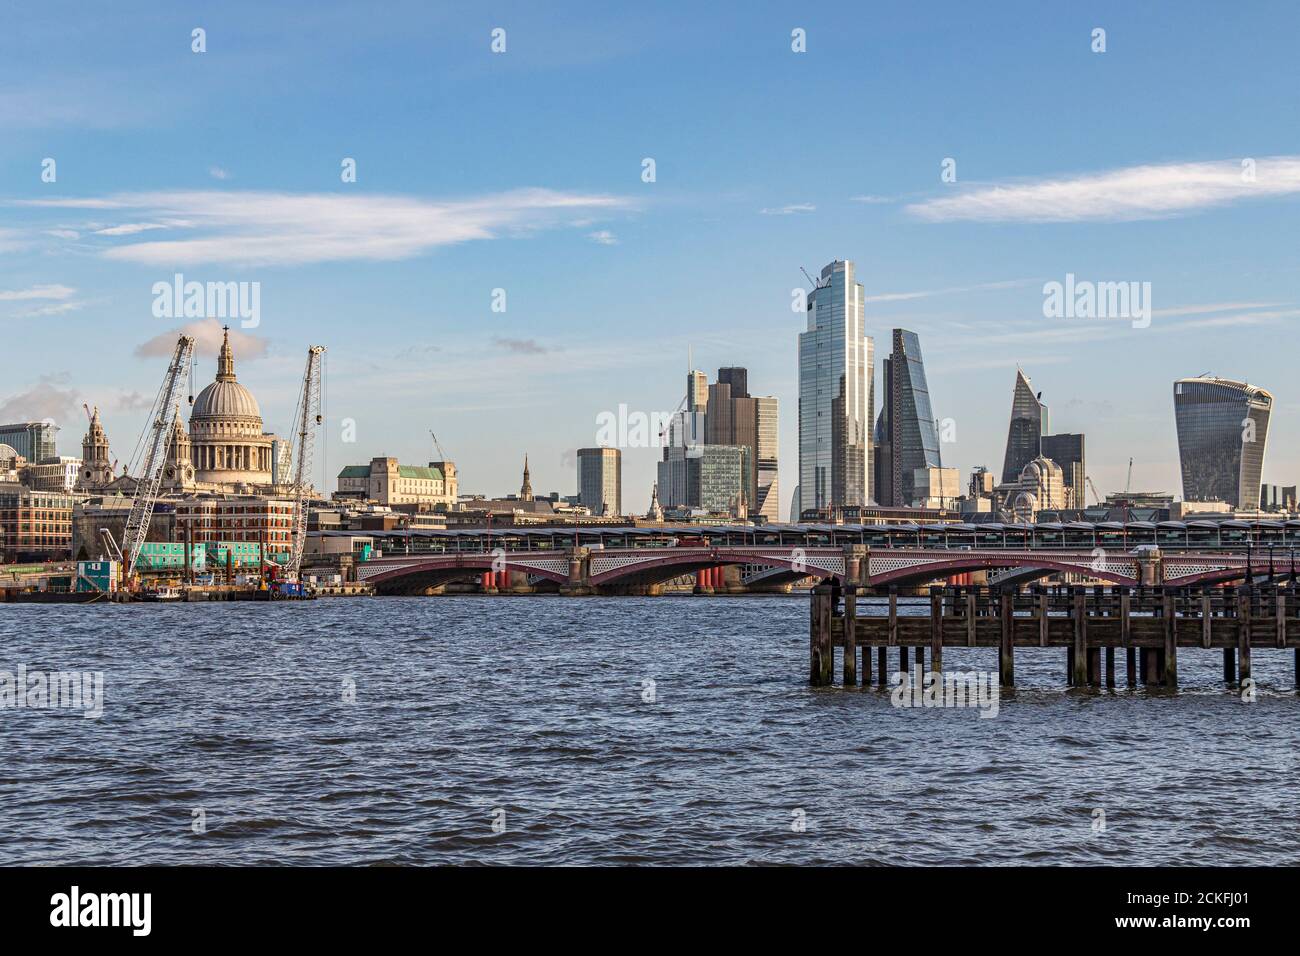 Looking towards Blackfriars Bridge across The River Thames towards the high rise buildings of The City Of London Stock Photo